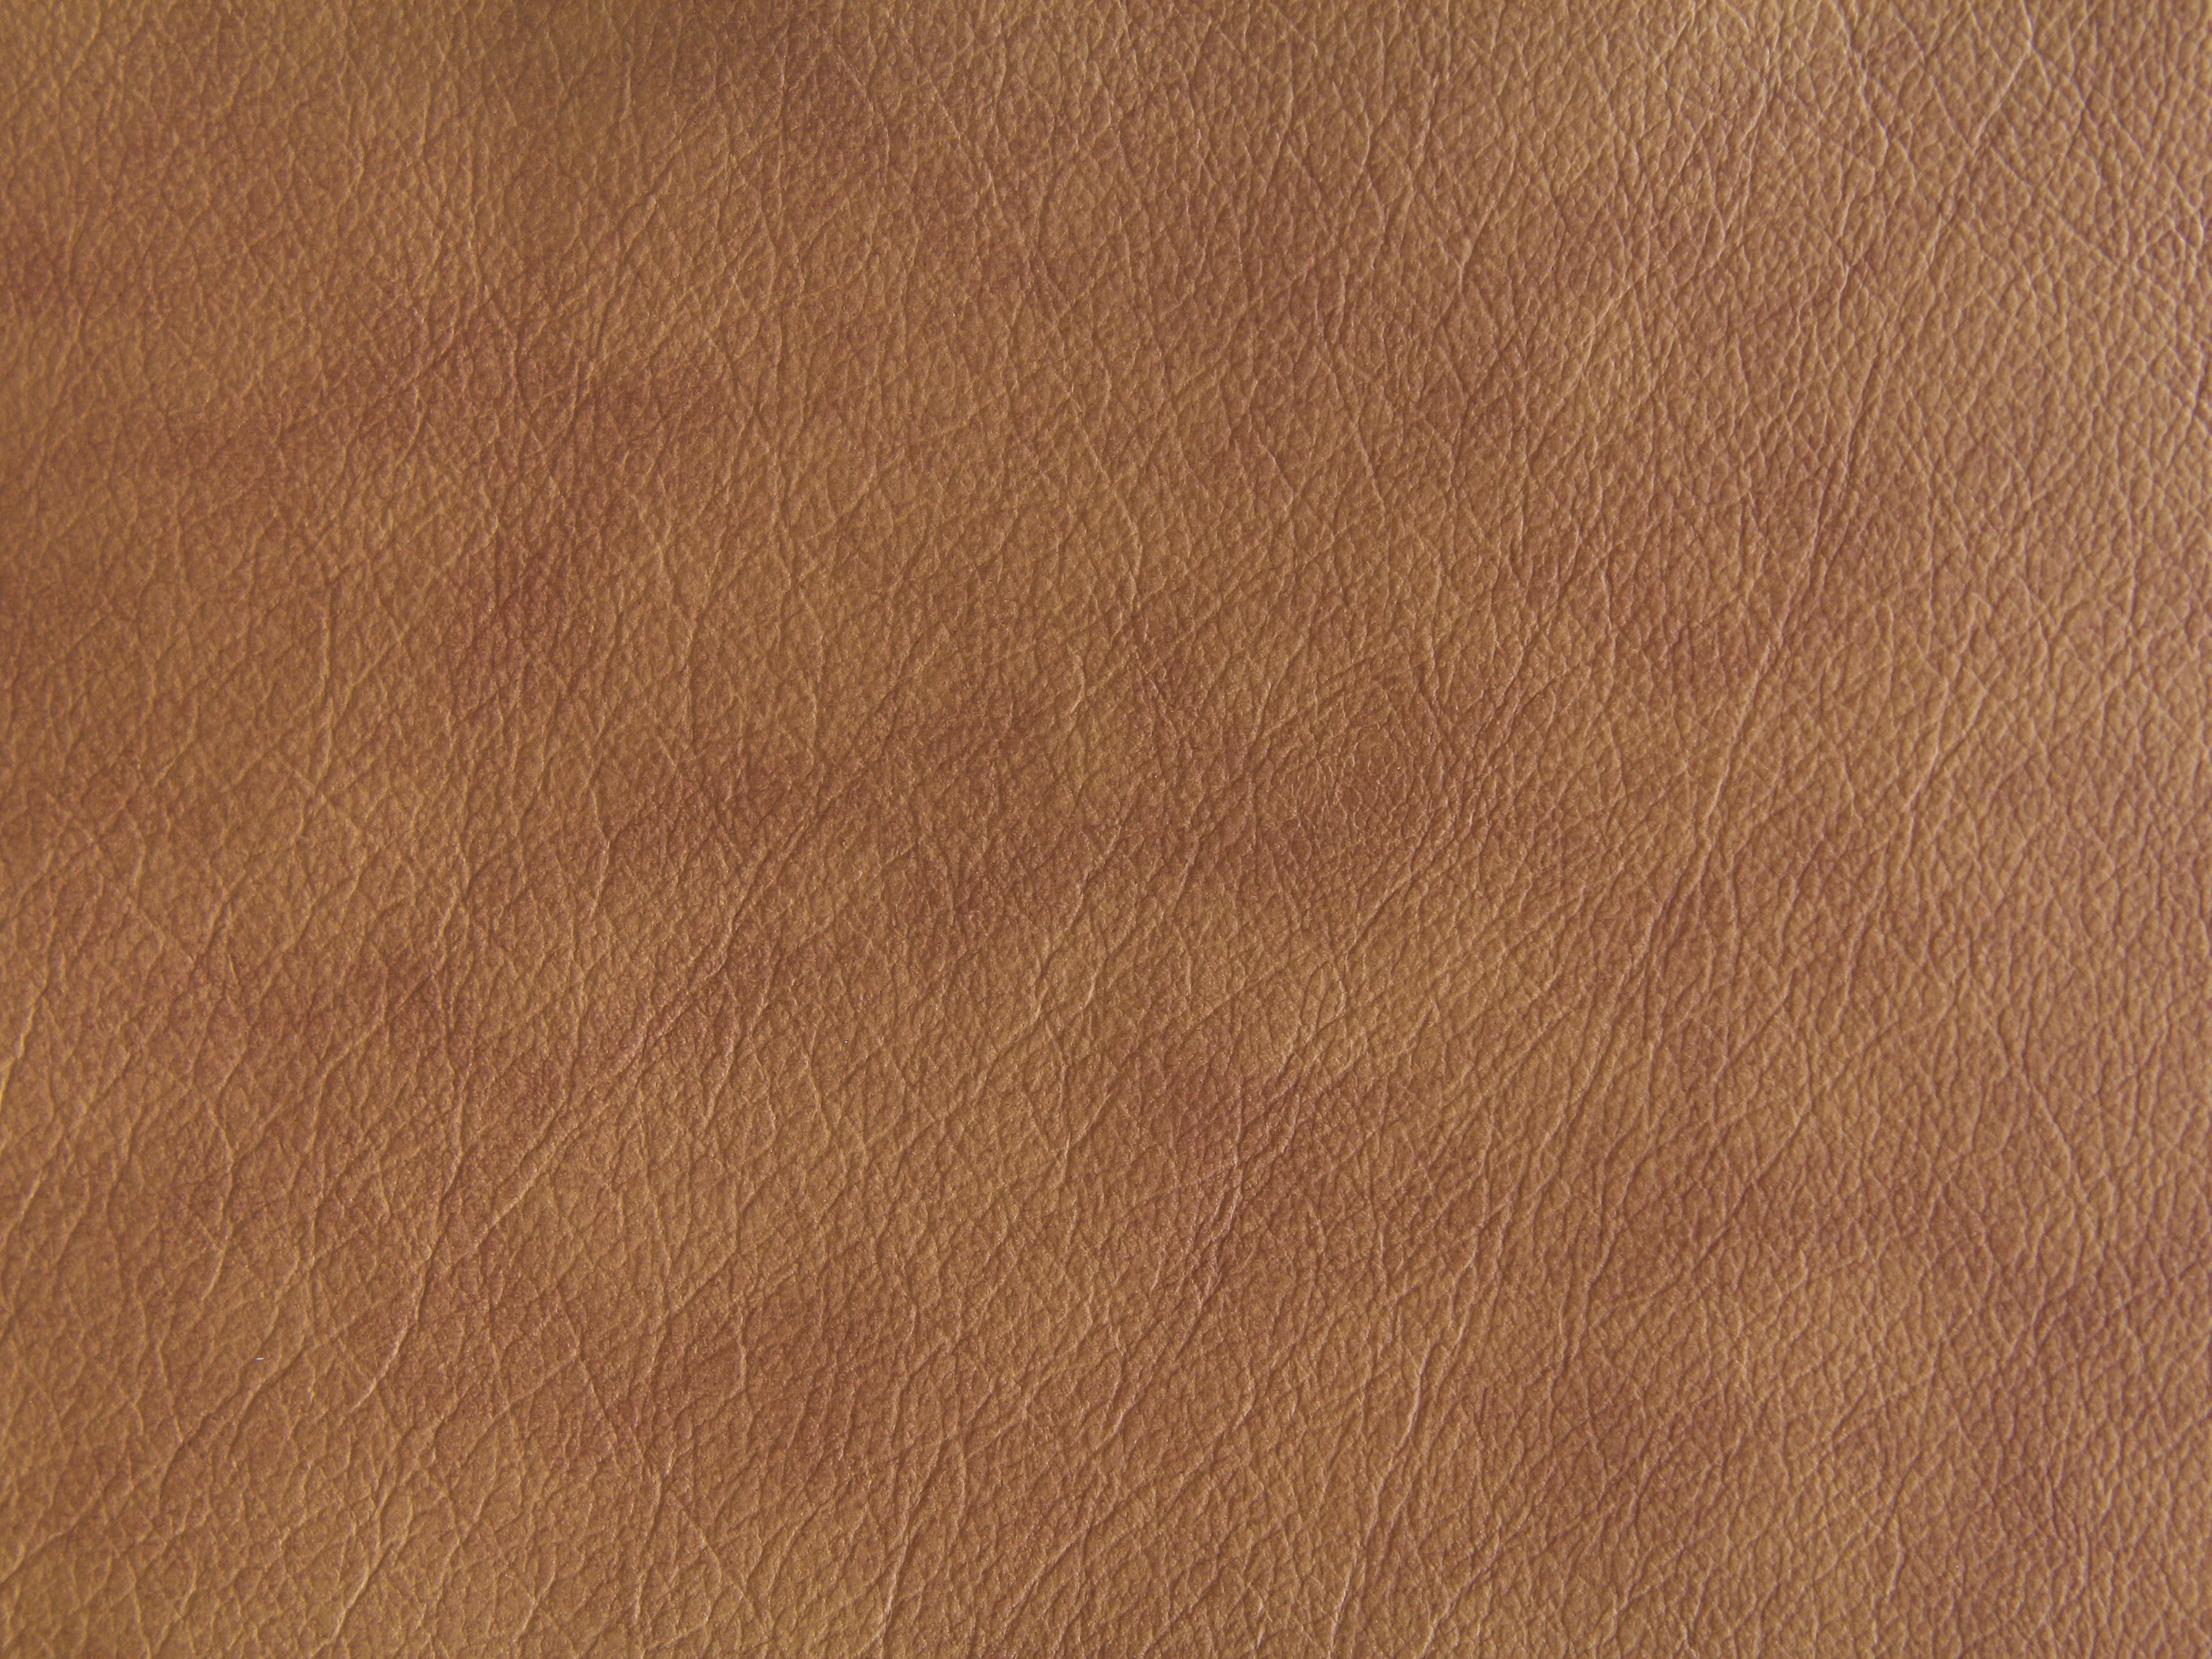 Seamless Wallpaper Vector Image, Brown Leather Wallpaper